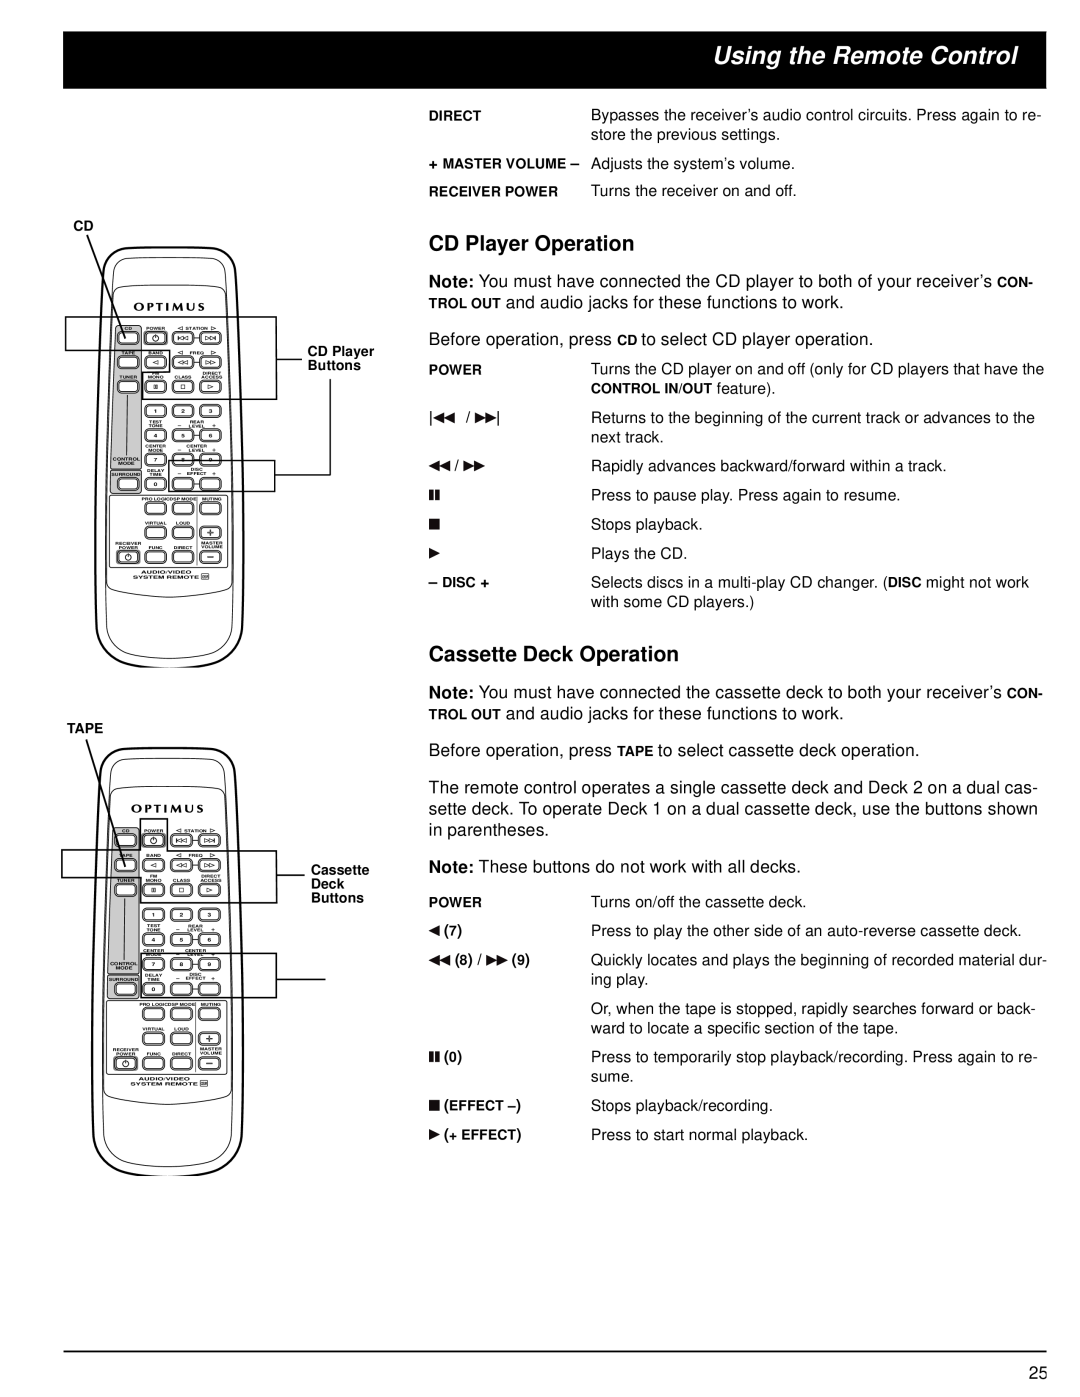 Panasonic STAV-3770 owner manual Using the Remote Control, CD Player Operation, Cassette Deck Operation 